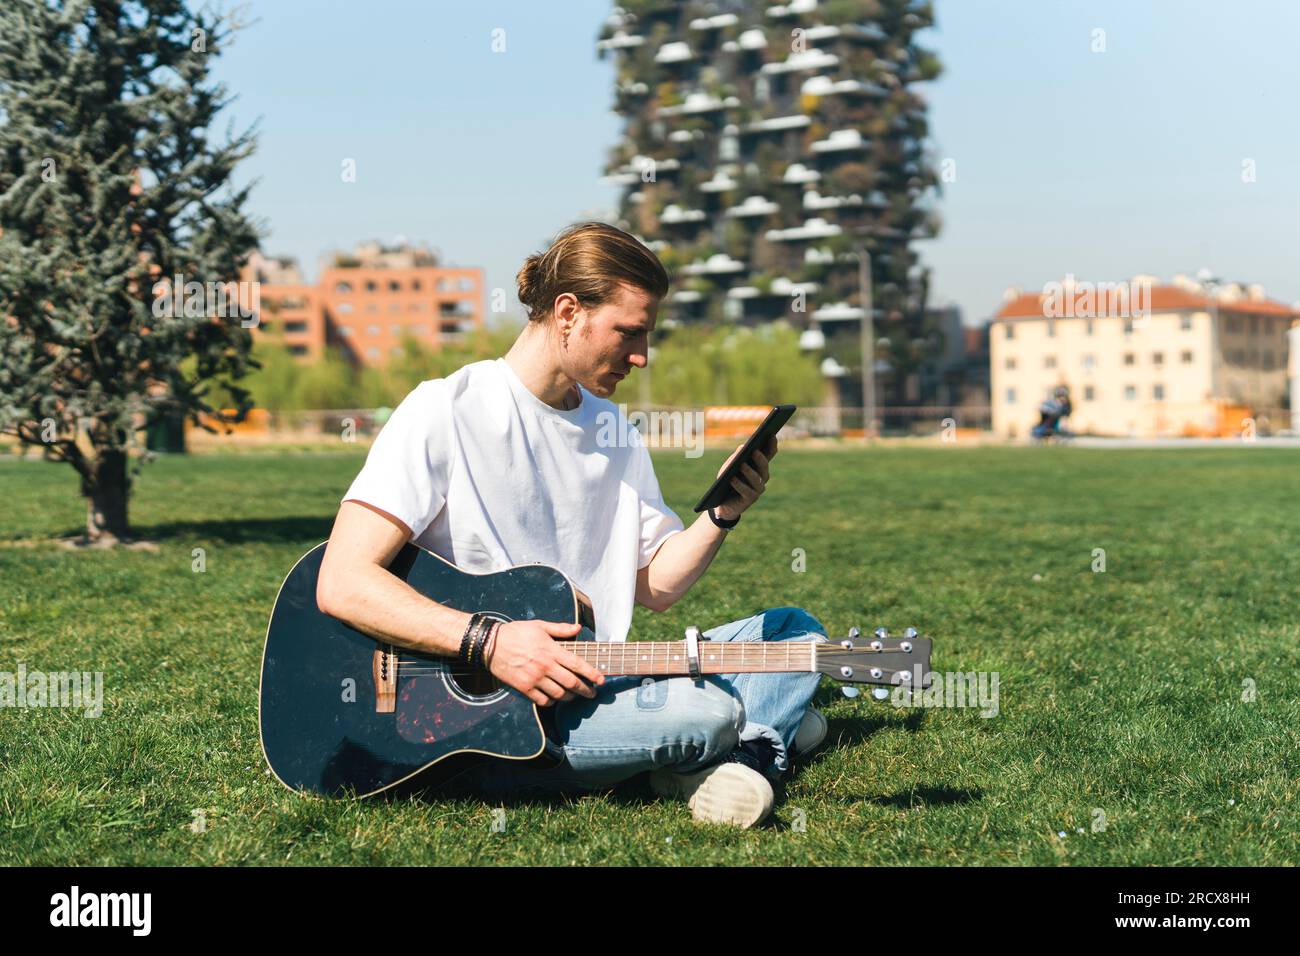 man looking at tablet device holding the guitar in a urban garden Stock Photo